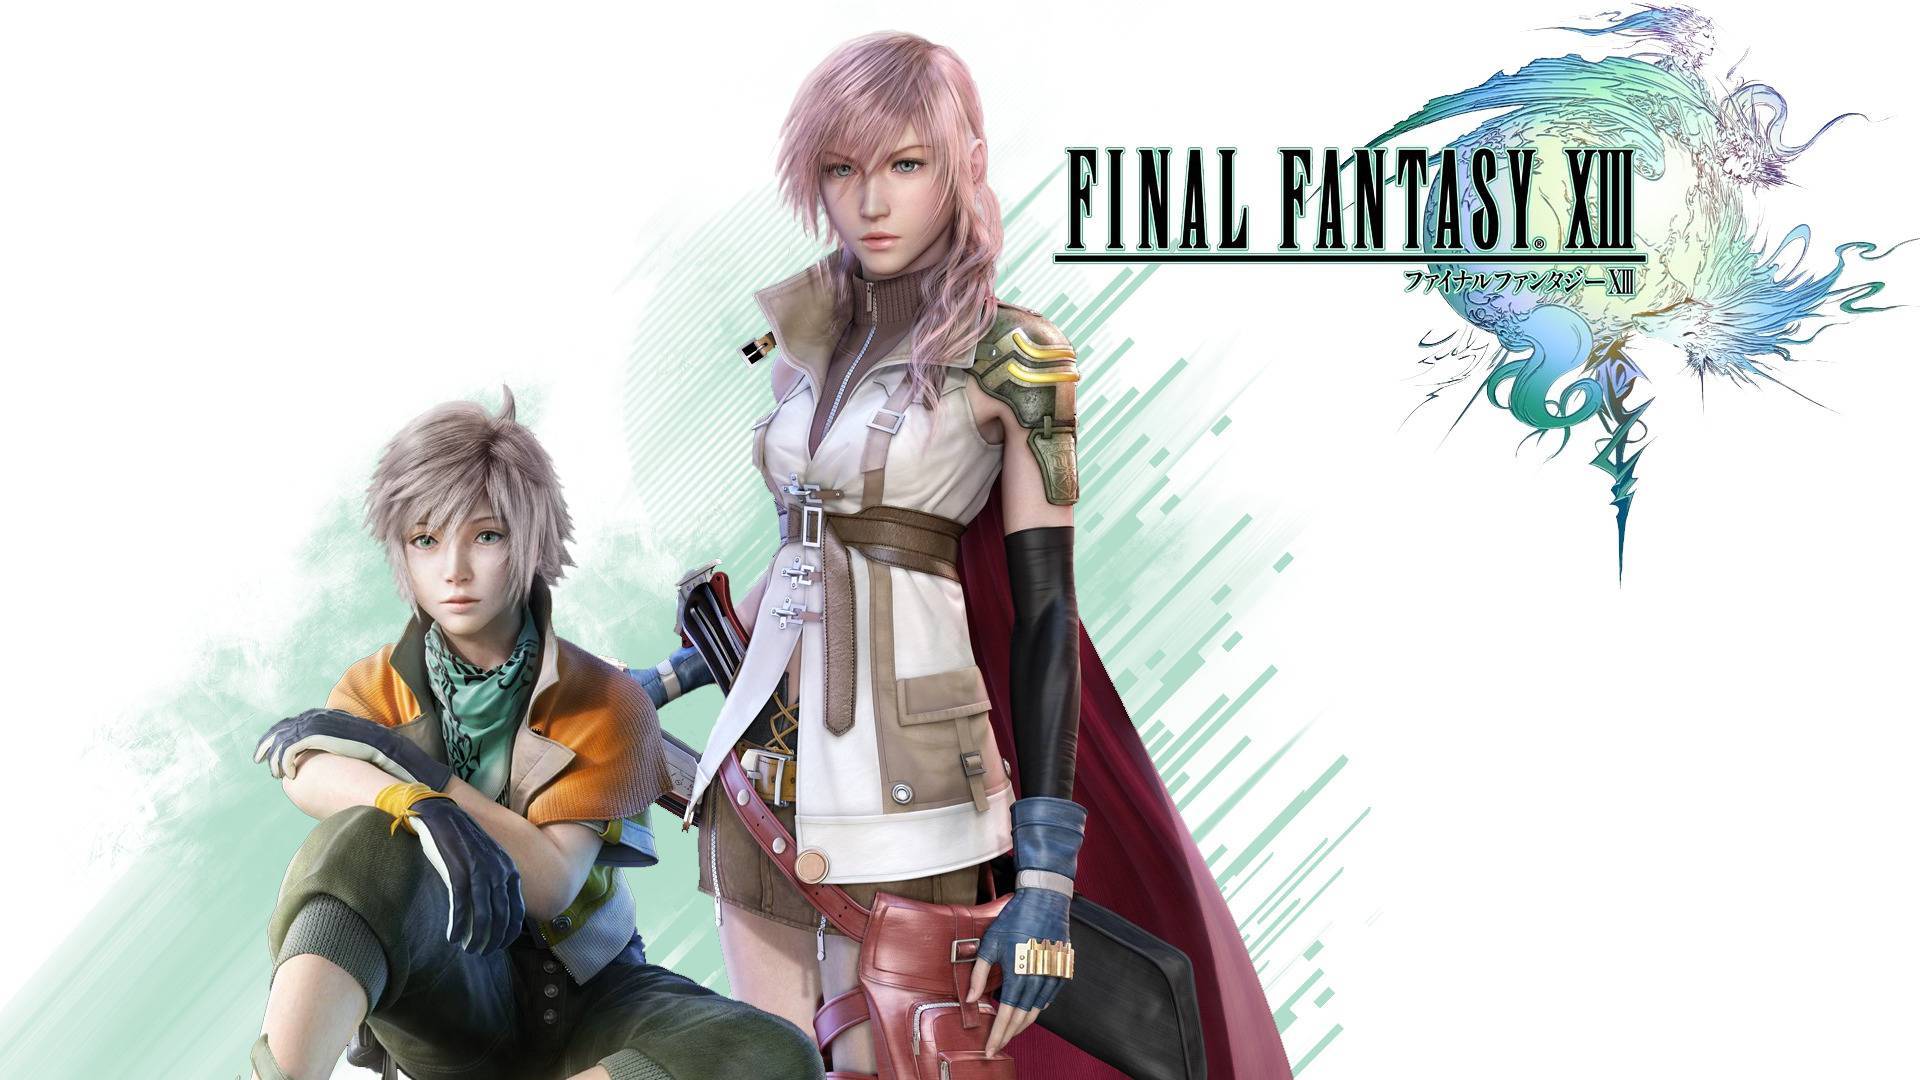 Buy Final Fantasy Xiii And Xiii 2 Bundle Pc Cd Key For Steam Price From 10 91